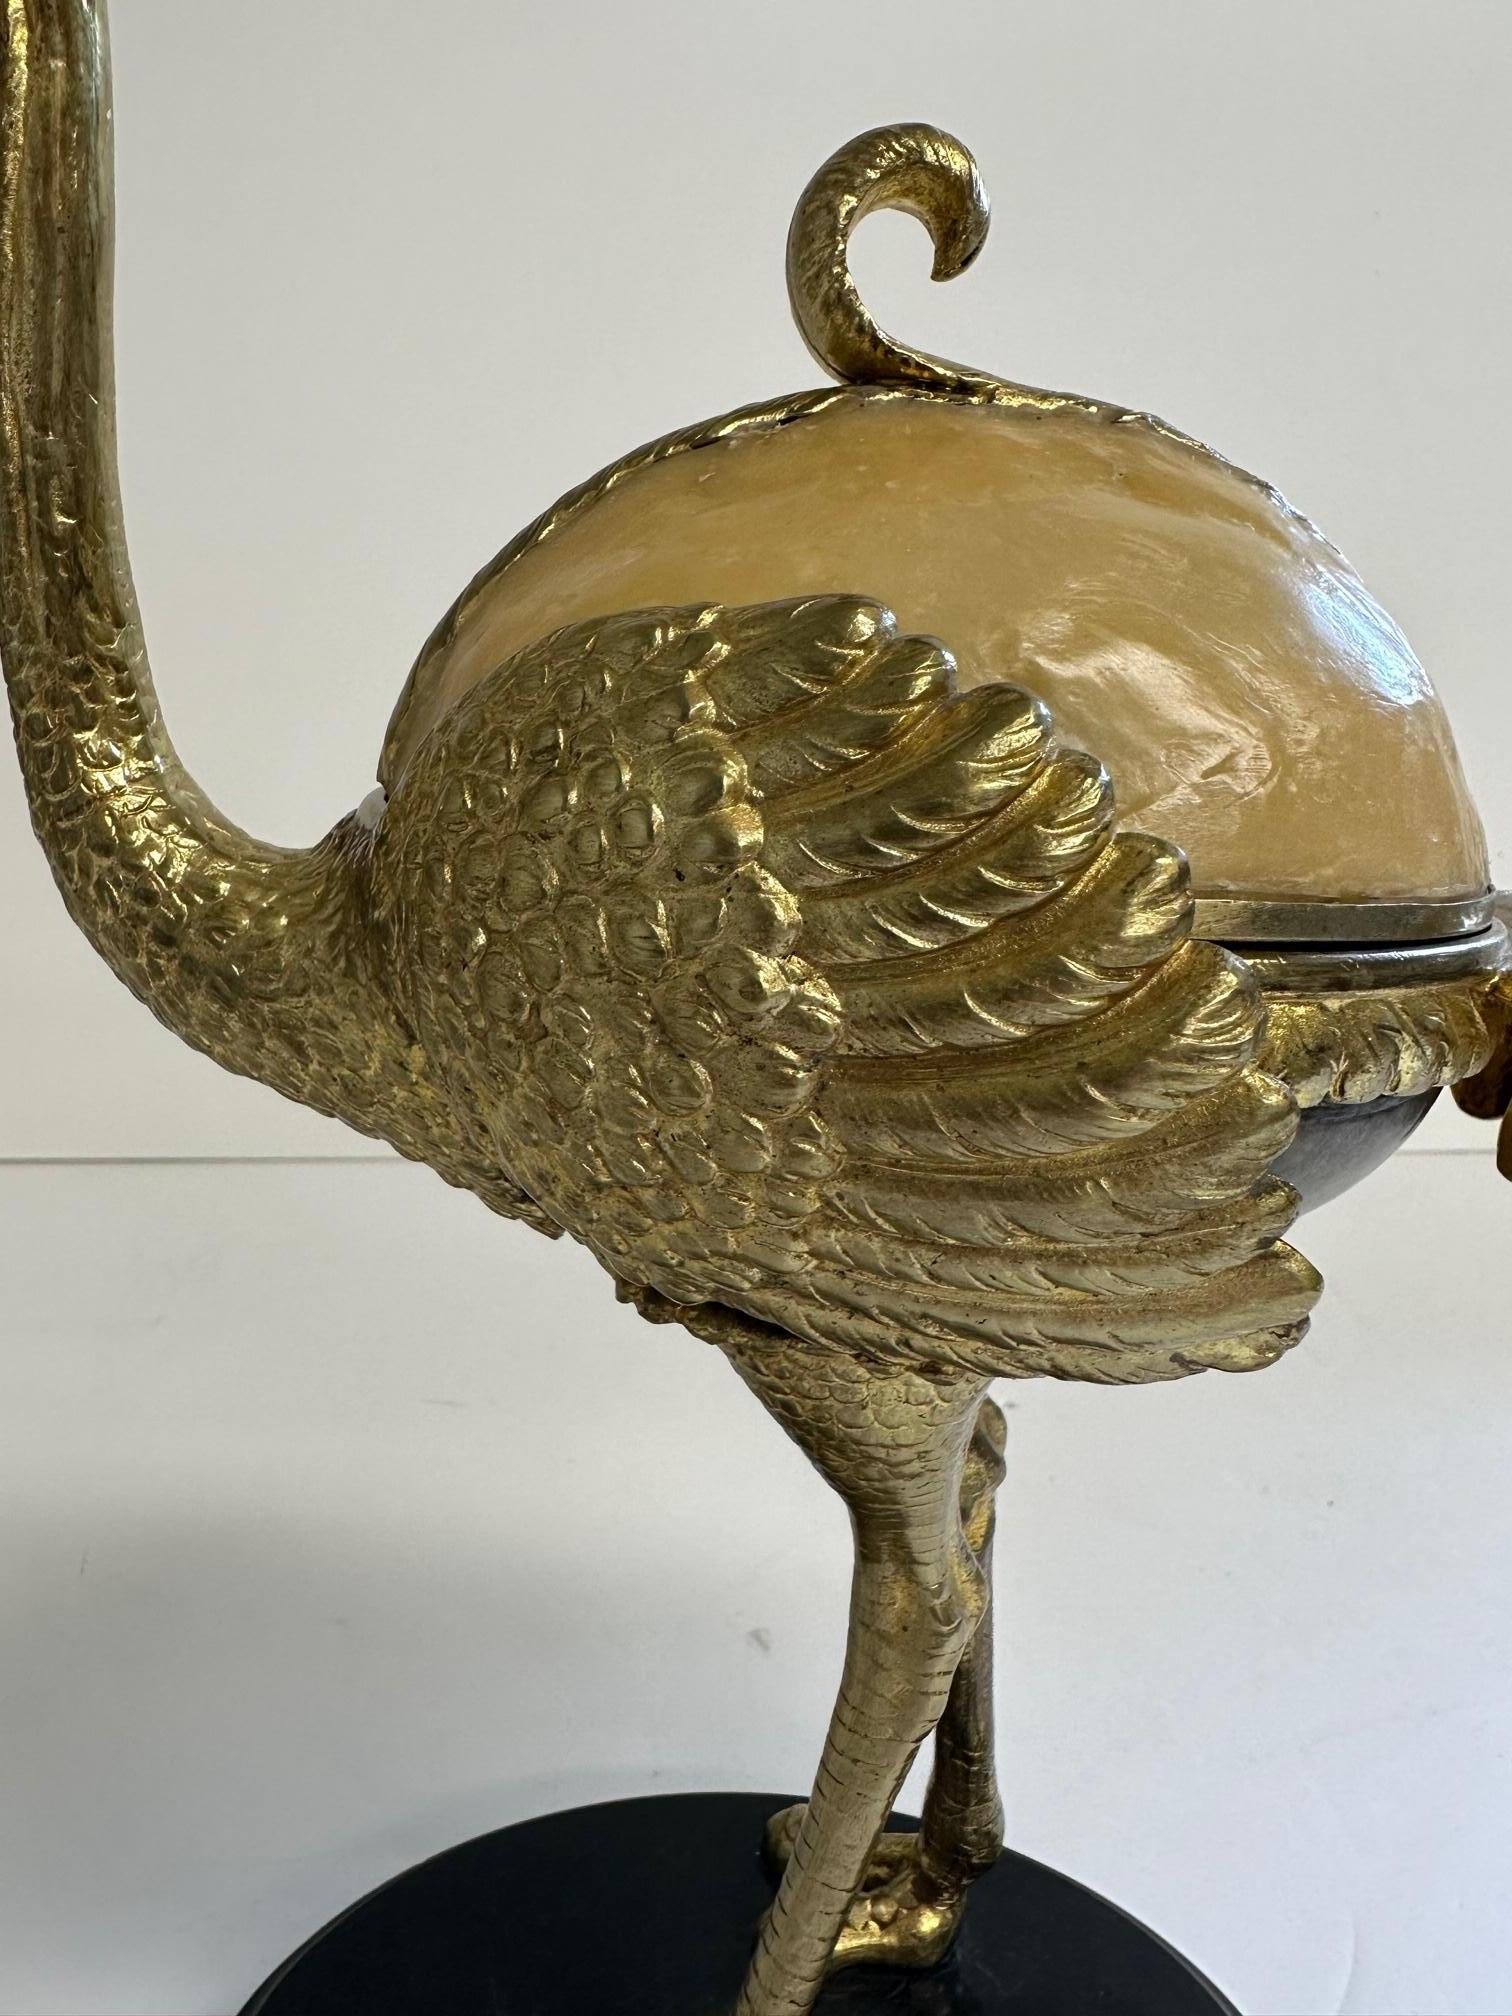 Unusual beautiful decorative box in the shape of a brass ostrich having rounded resin top and black marble base.